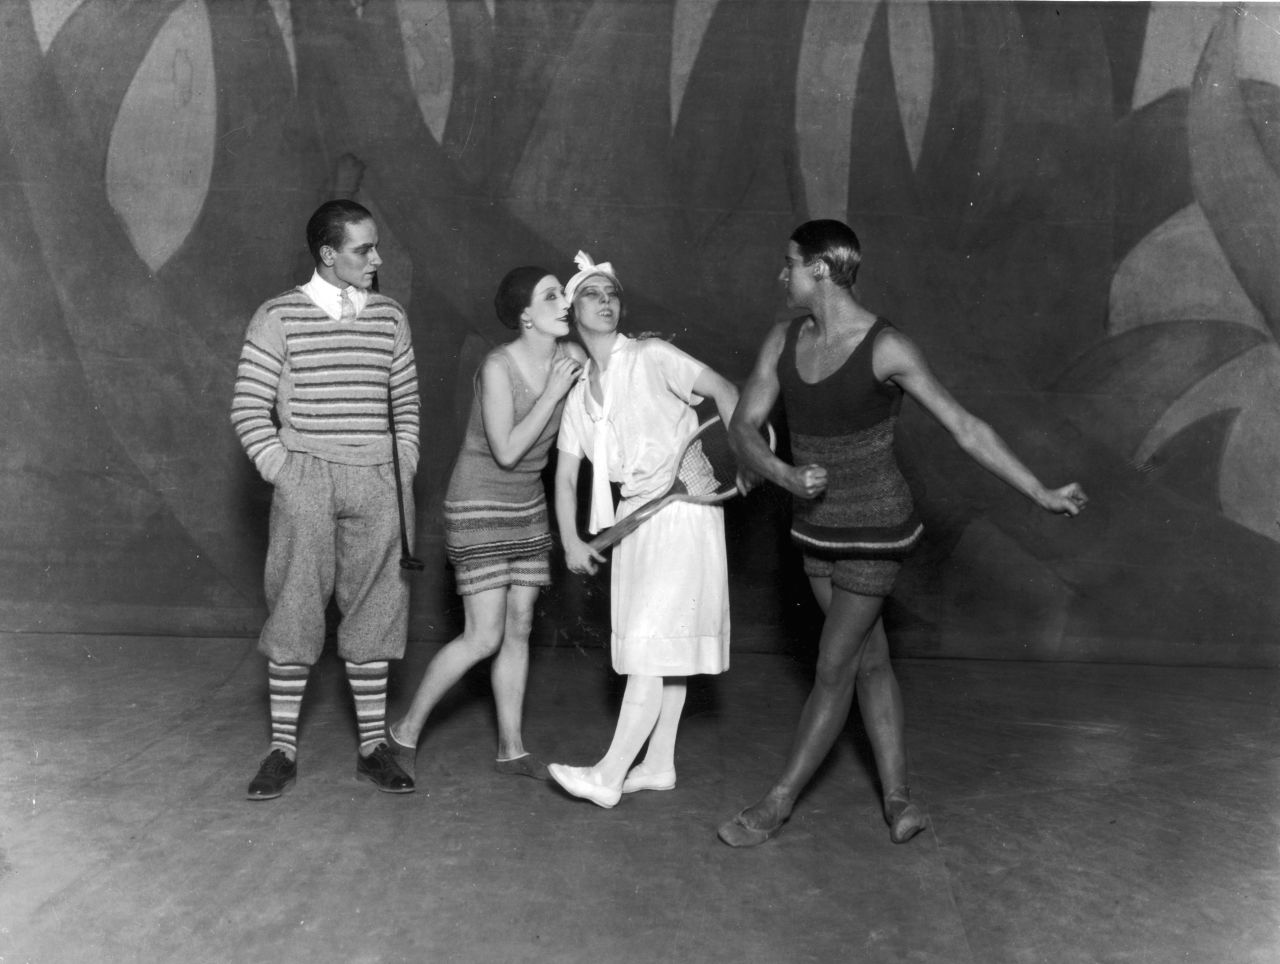 She was one of the world's most famous female athletes in the 1920s, and her success inspired a character in "Le Train Bleu," a production by the Diaghilev Ballet Russe which featured costumes by Coco Chanel. 